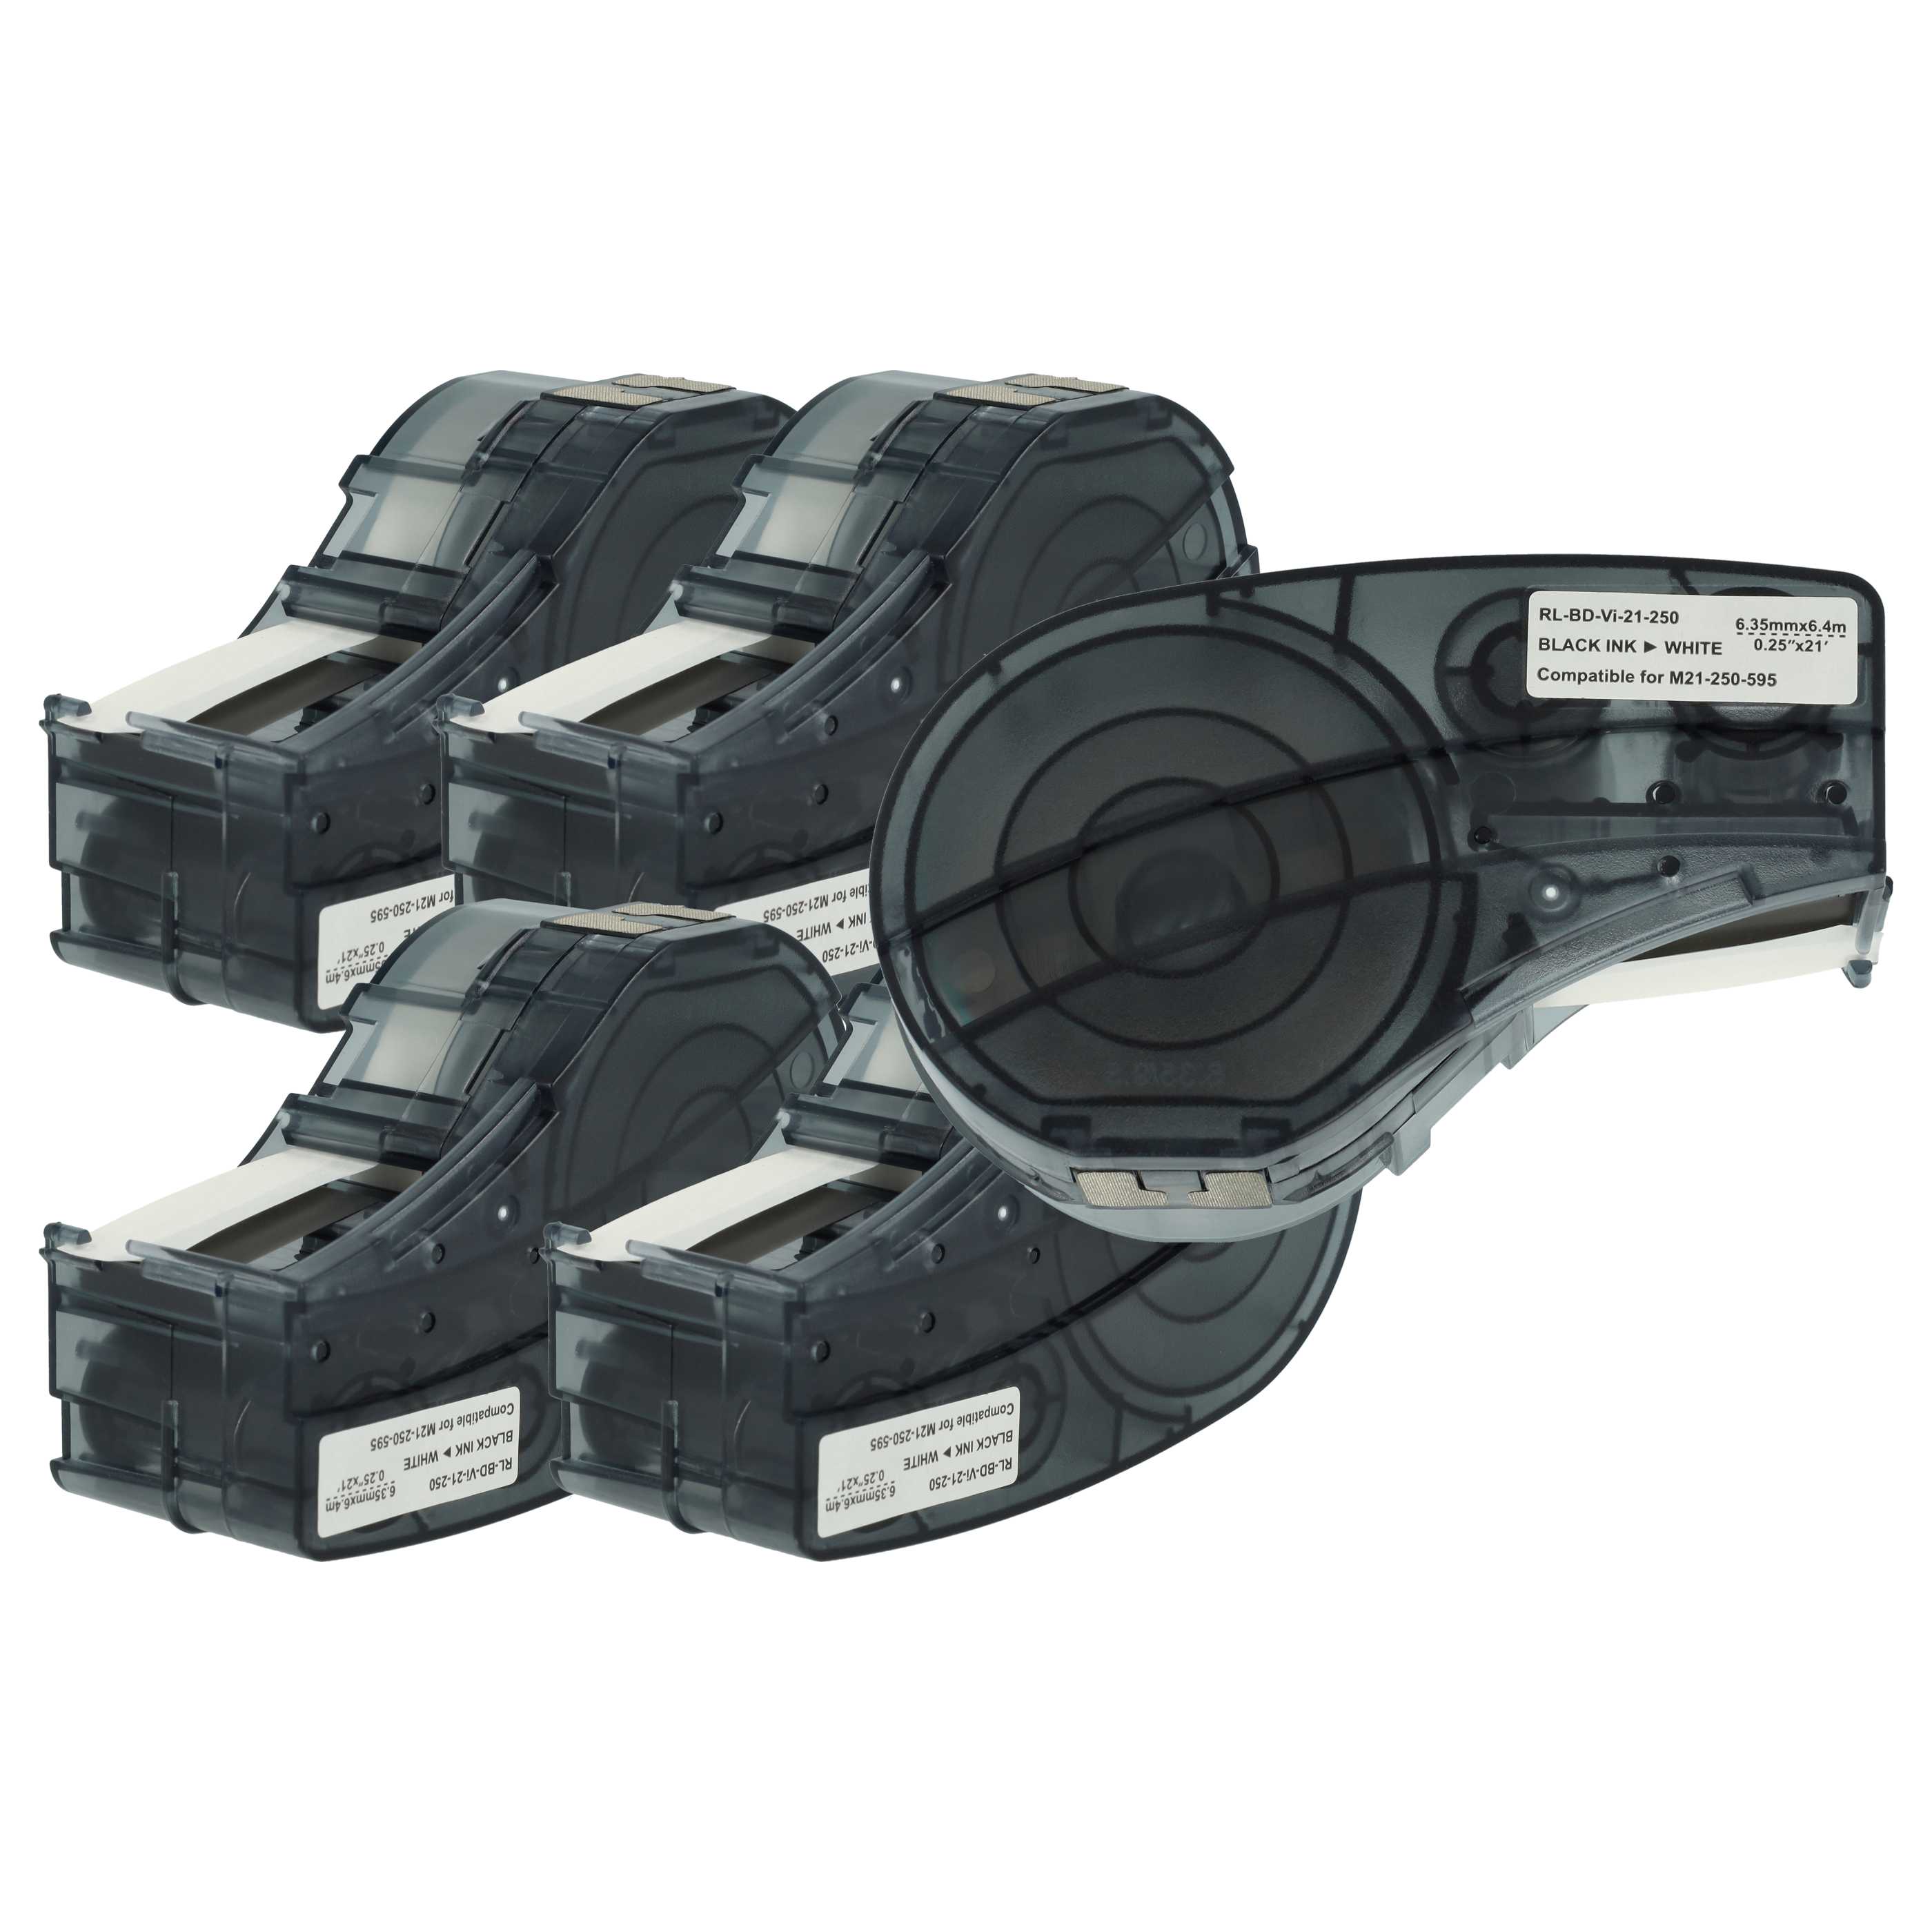 5x Label Tape as Replacement for Brady M21-250-595-WT - 6.35 mm Black to White, Vinyl